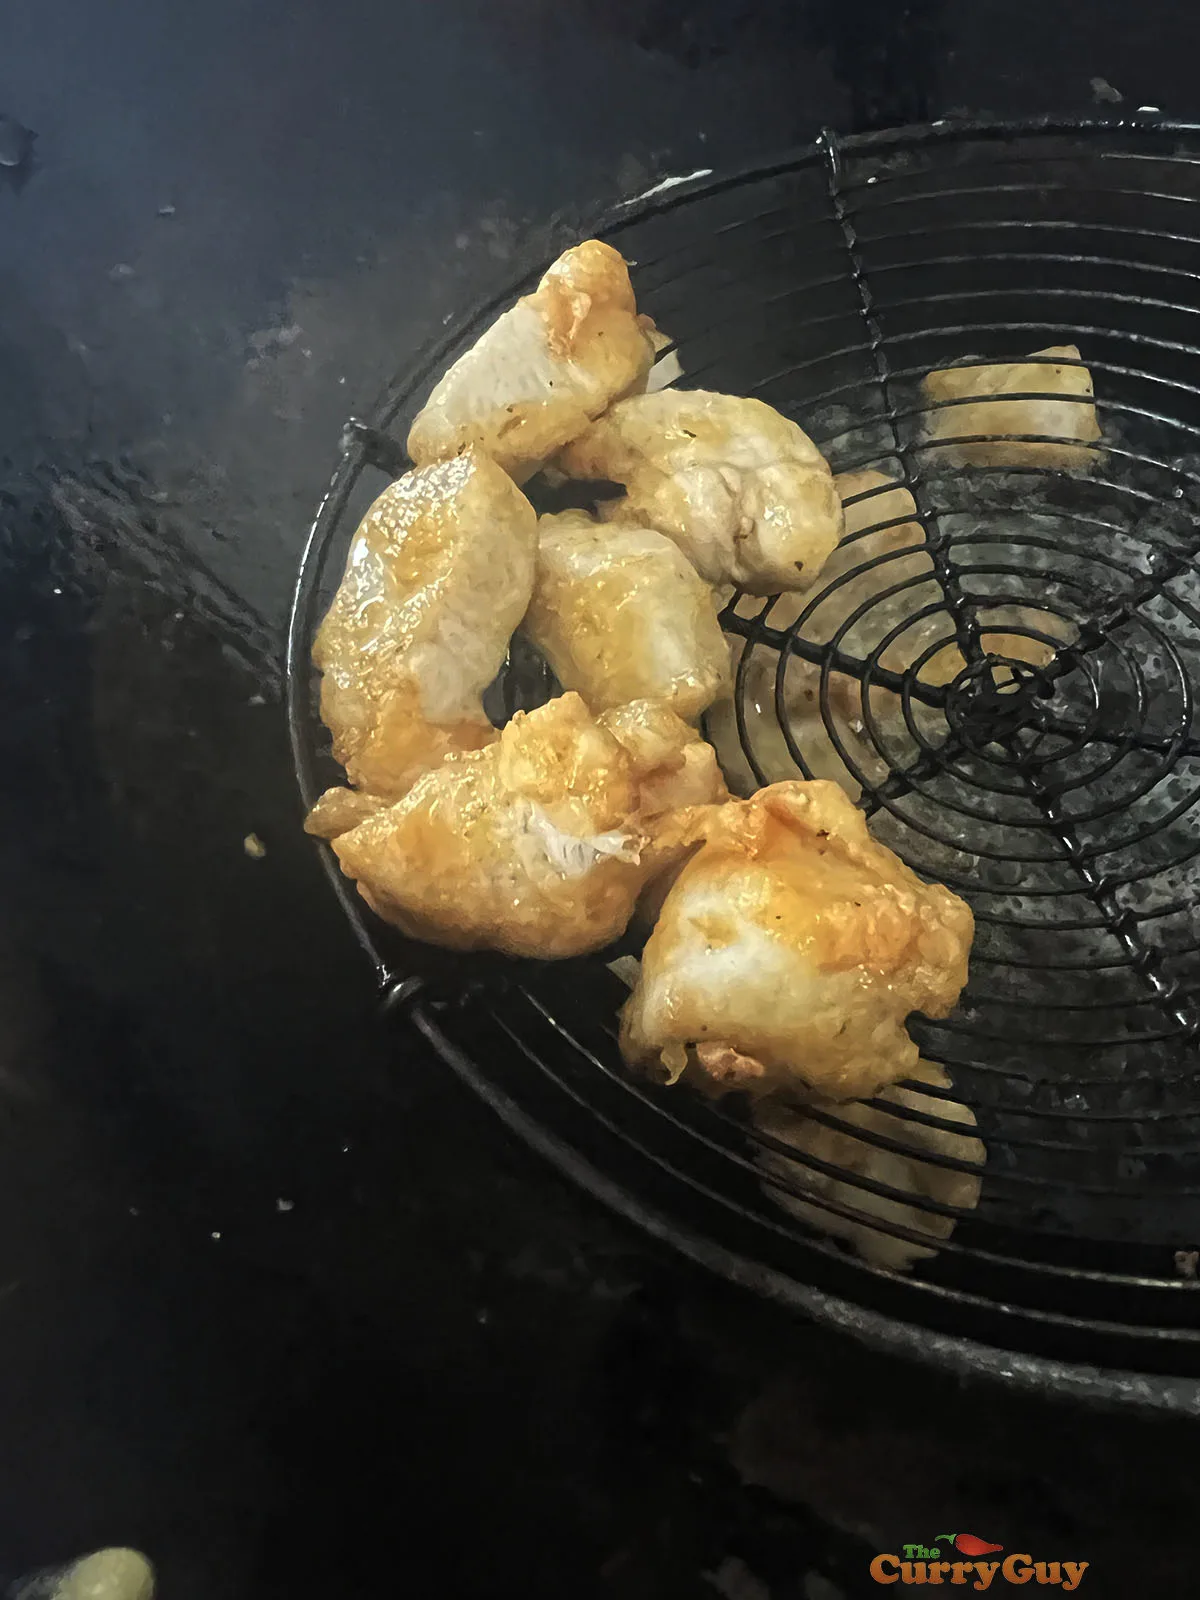 Transferring the cooked chicken out of the oil.